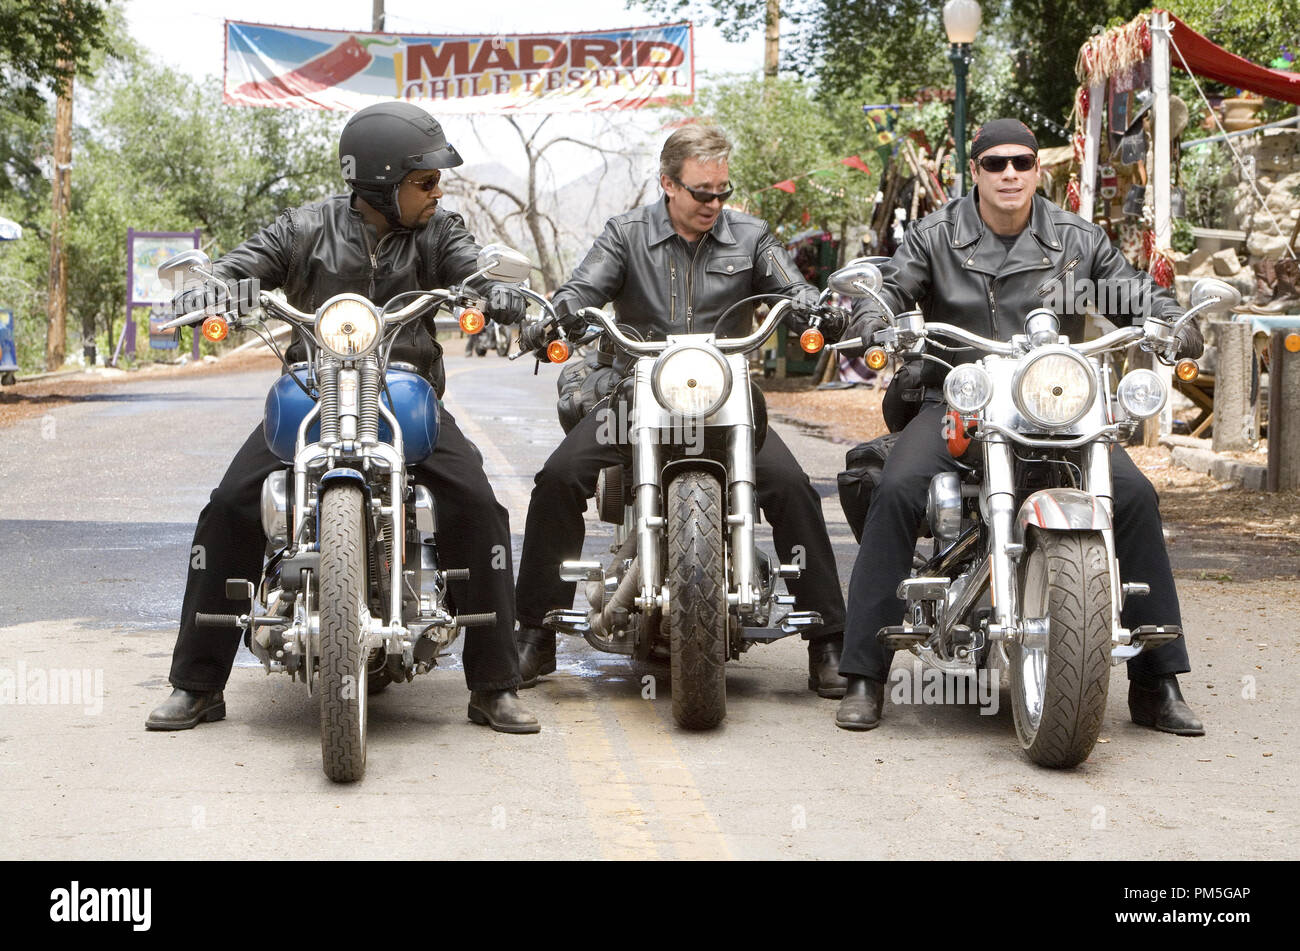 Studio Publicity Still from 'Wild Hogs' Martin Lawrence, Tim Allen, John Travolta © 2007 Touchstone Pictures Photo credit: Lorey Sebastian    File Reference # 307381987THA  For Editorial Use Only -  All Rights Reserved Stock Photo